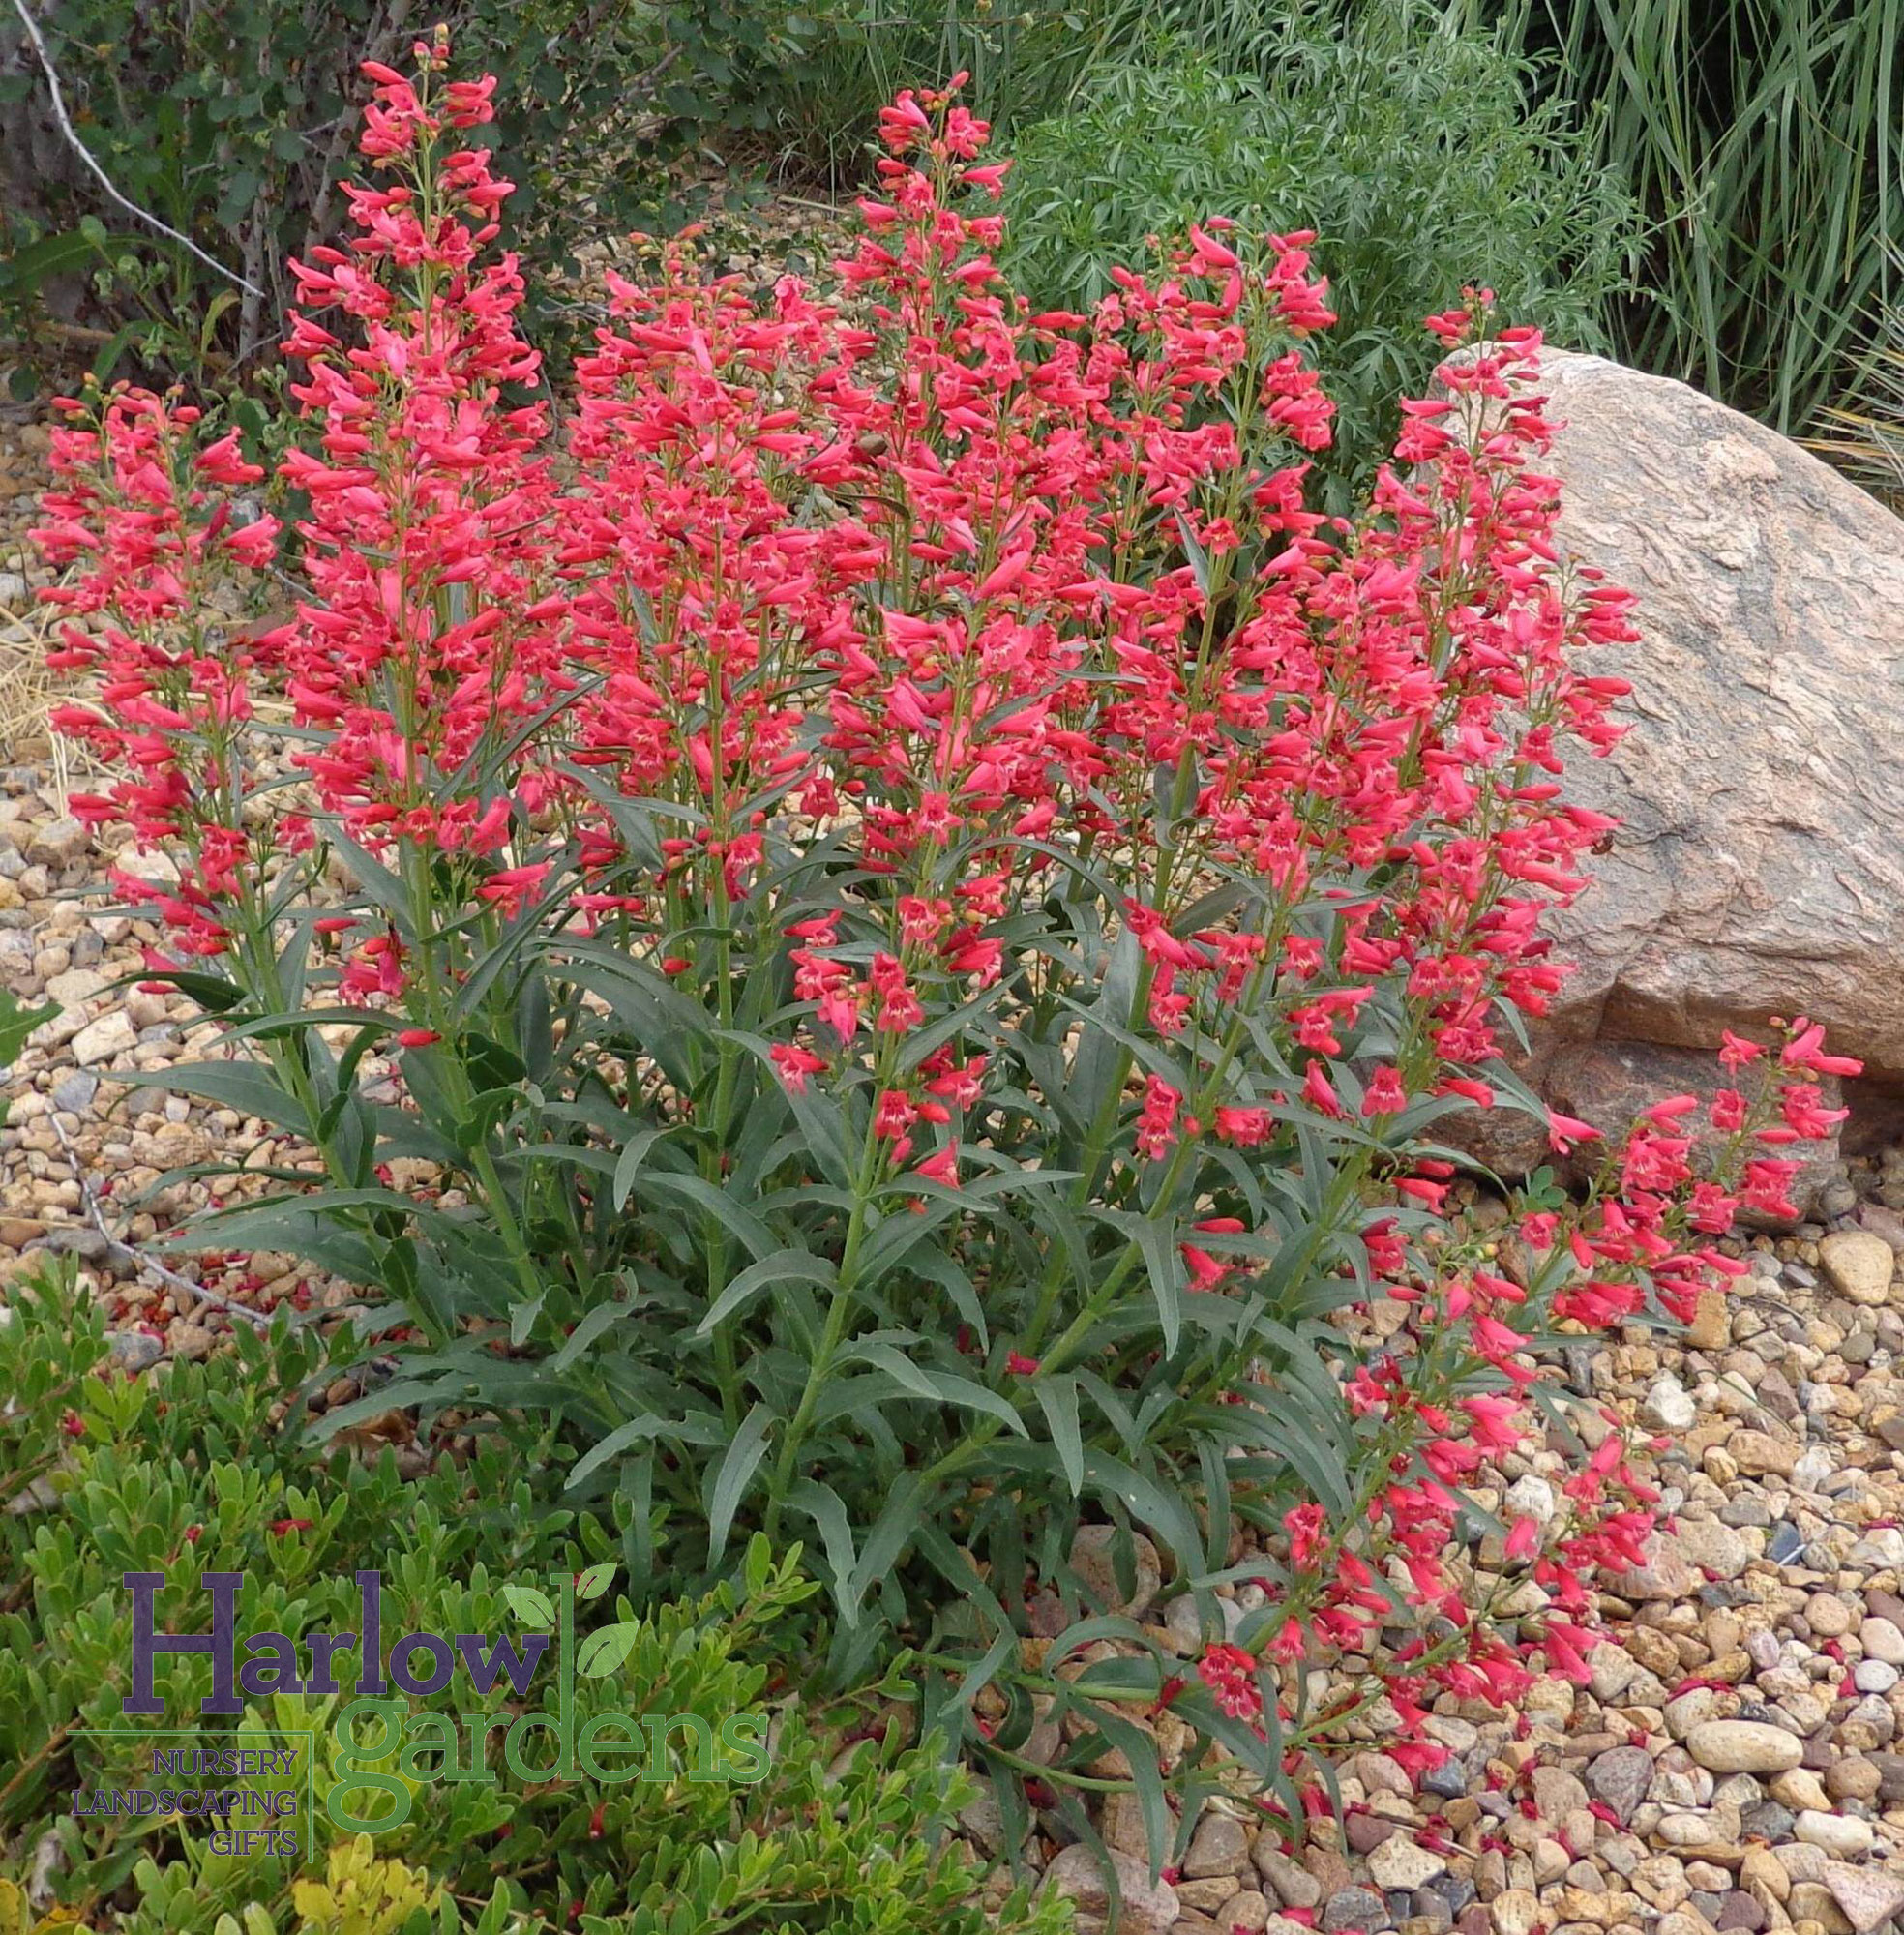 Coral Penstemon for sale at Harlow Gardens Tucson.